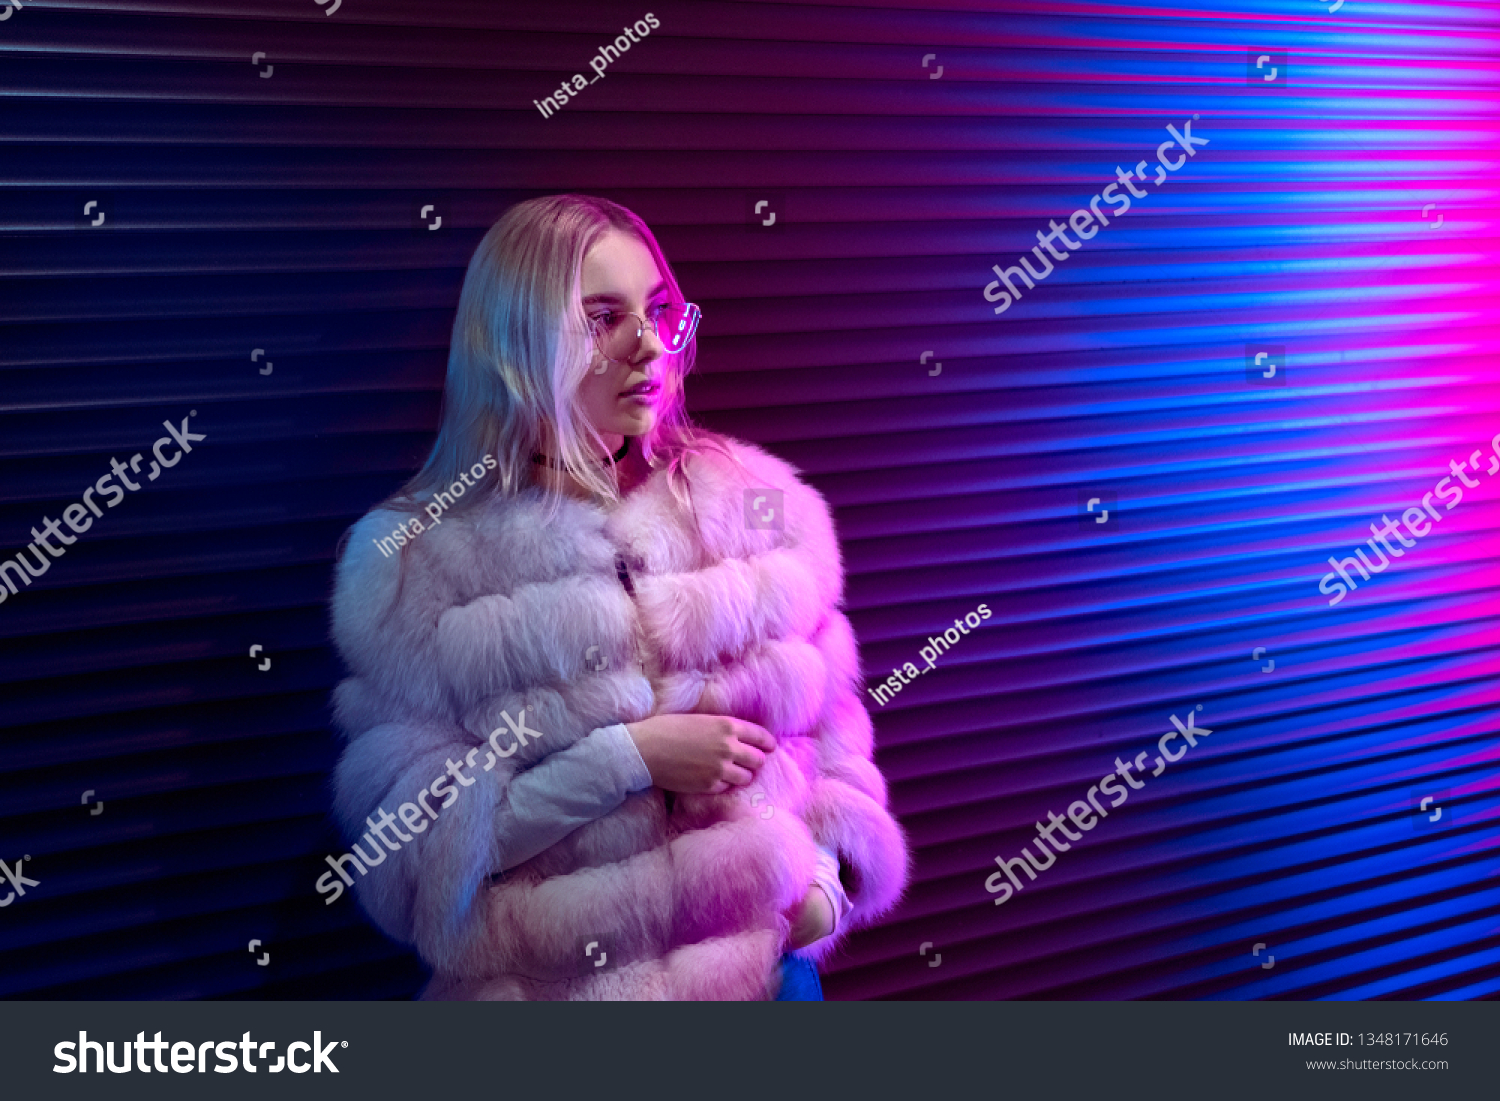 Teen hipster girl in stylish glasses and fur standing on purple street neon light wall background, female teenager fashion model pretty young woman looking at night club city light glow, back to 80s #1348171646